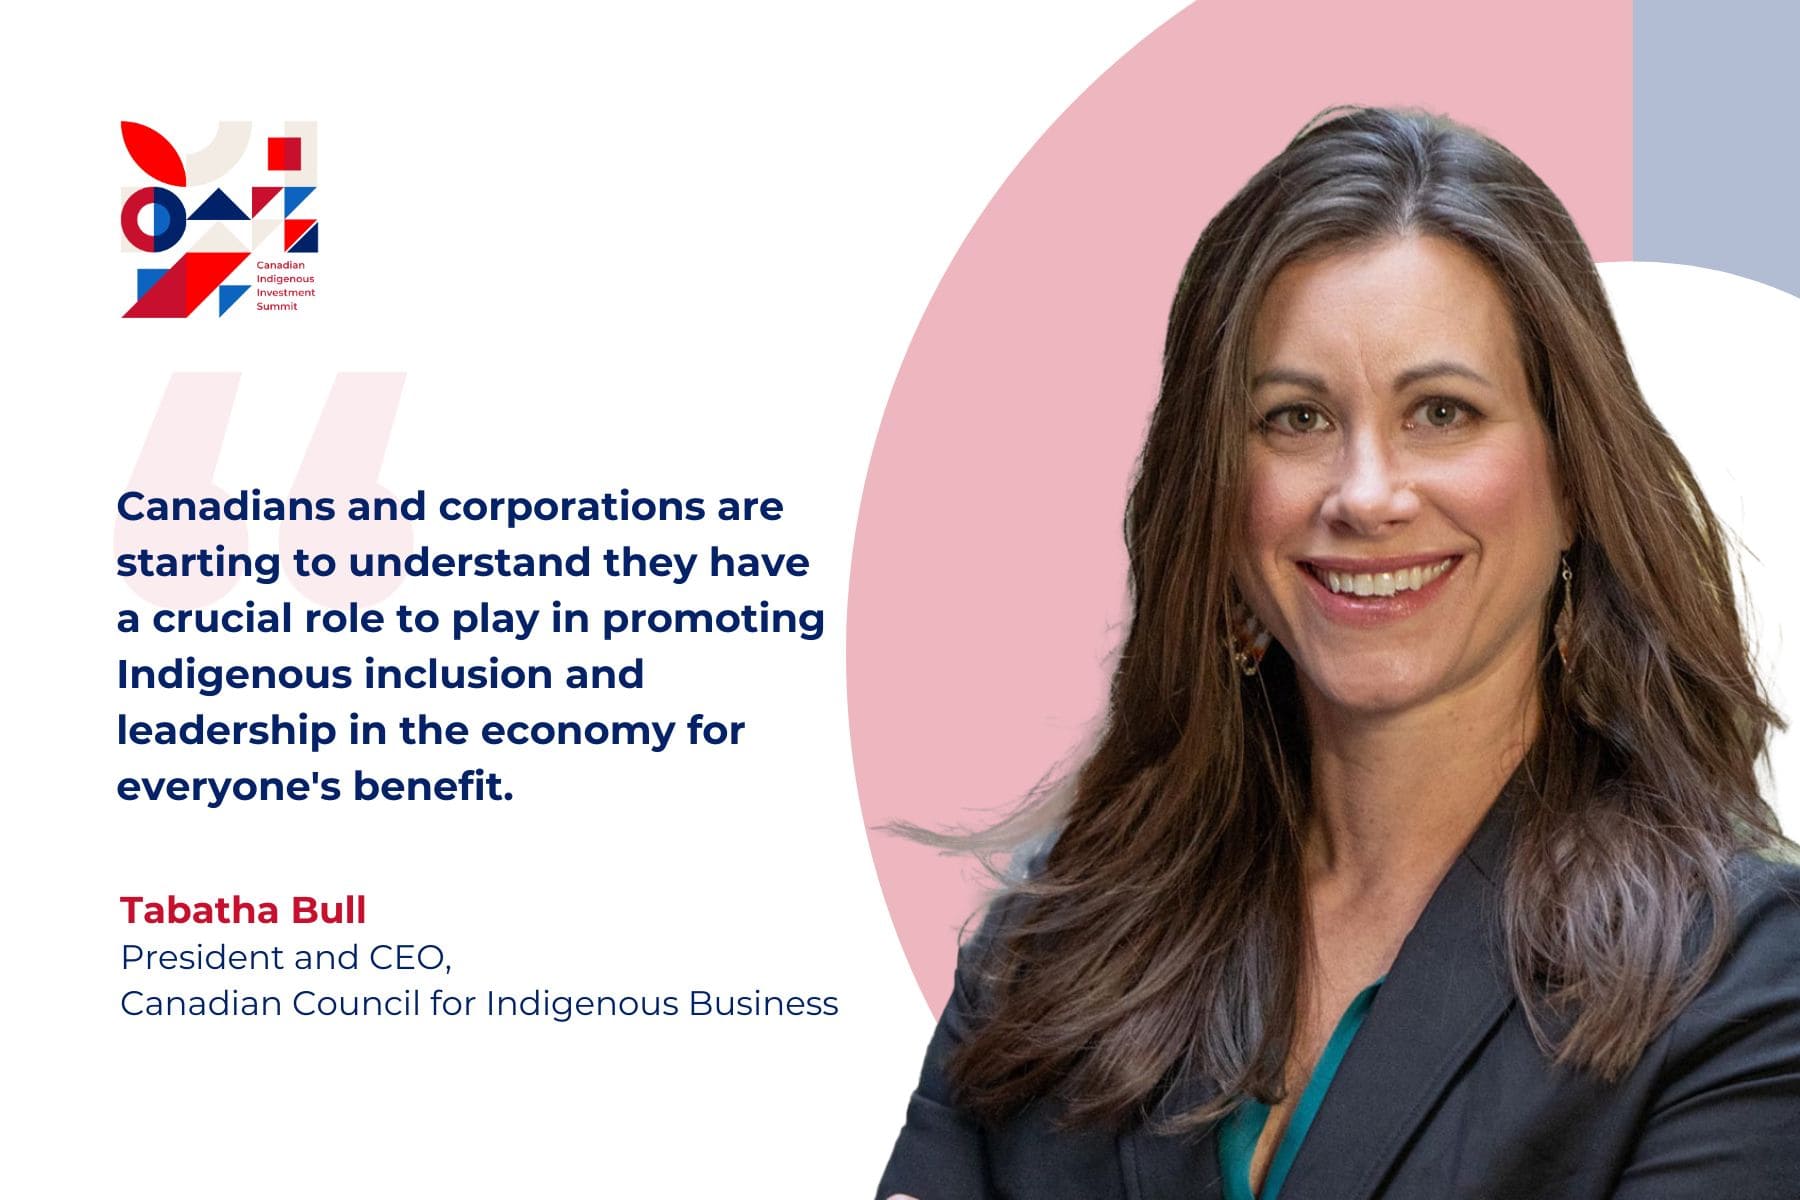 Tabatha Bull On Driving Indigenous Business Growth in Canada